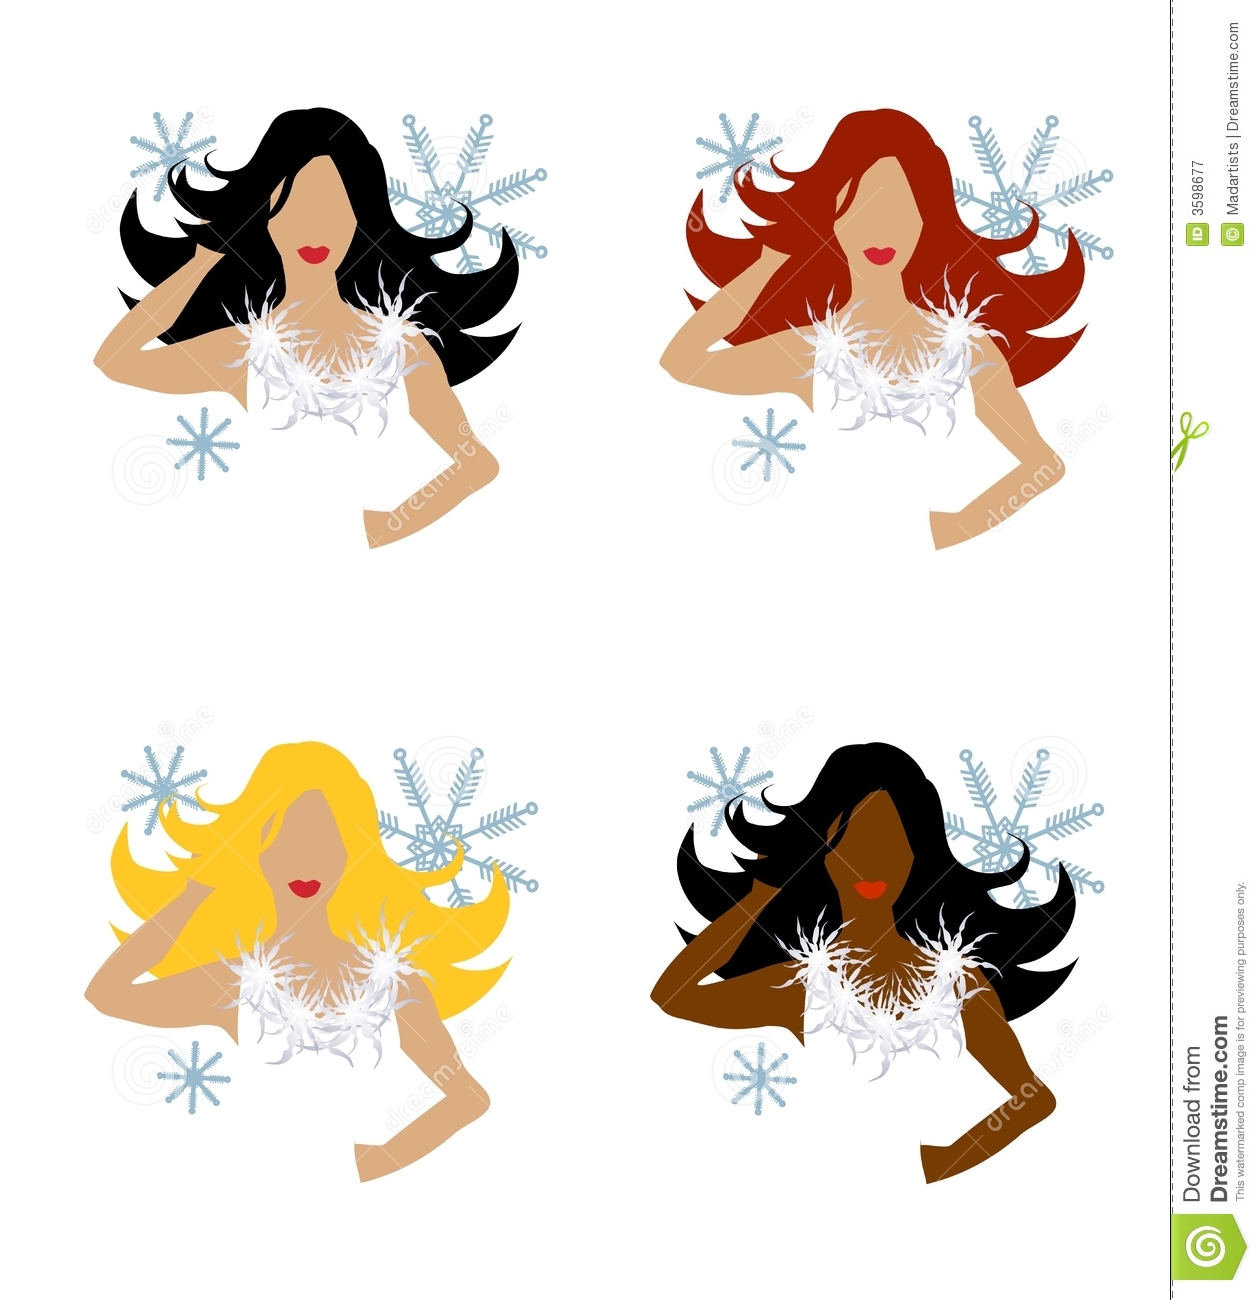 Clip Art Illustration Of 4 Winter Fashion Female Models From The